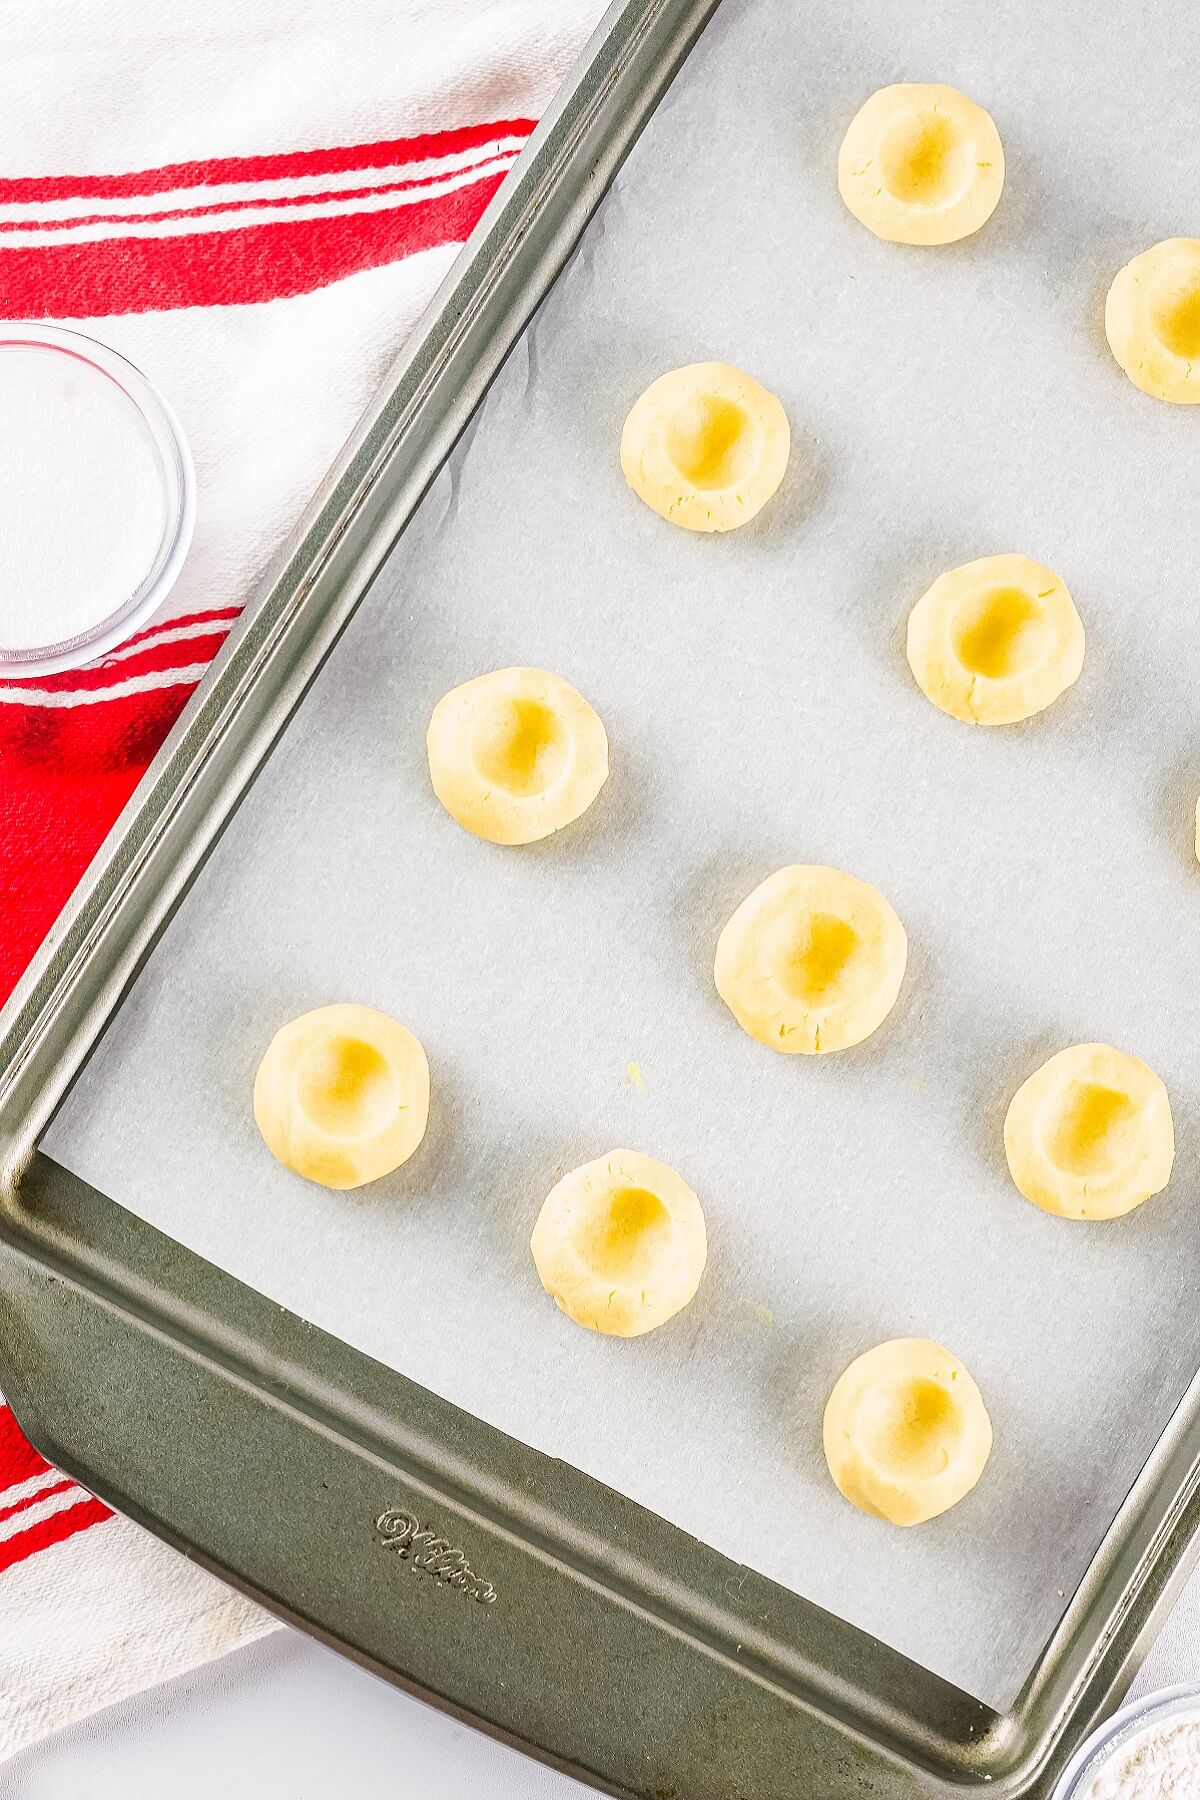 Unbaked and unfilled thumbprint cookies on a parchment lined baking sheet.